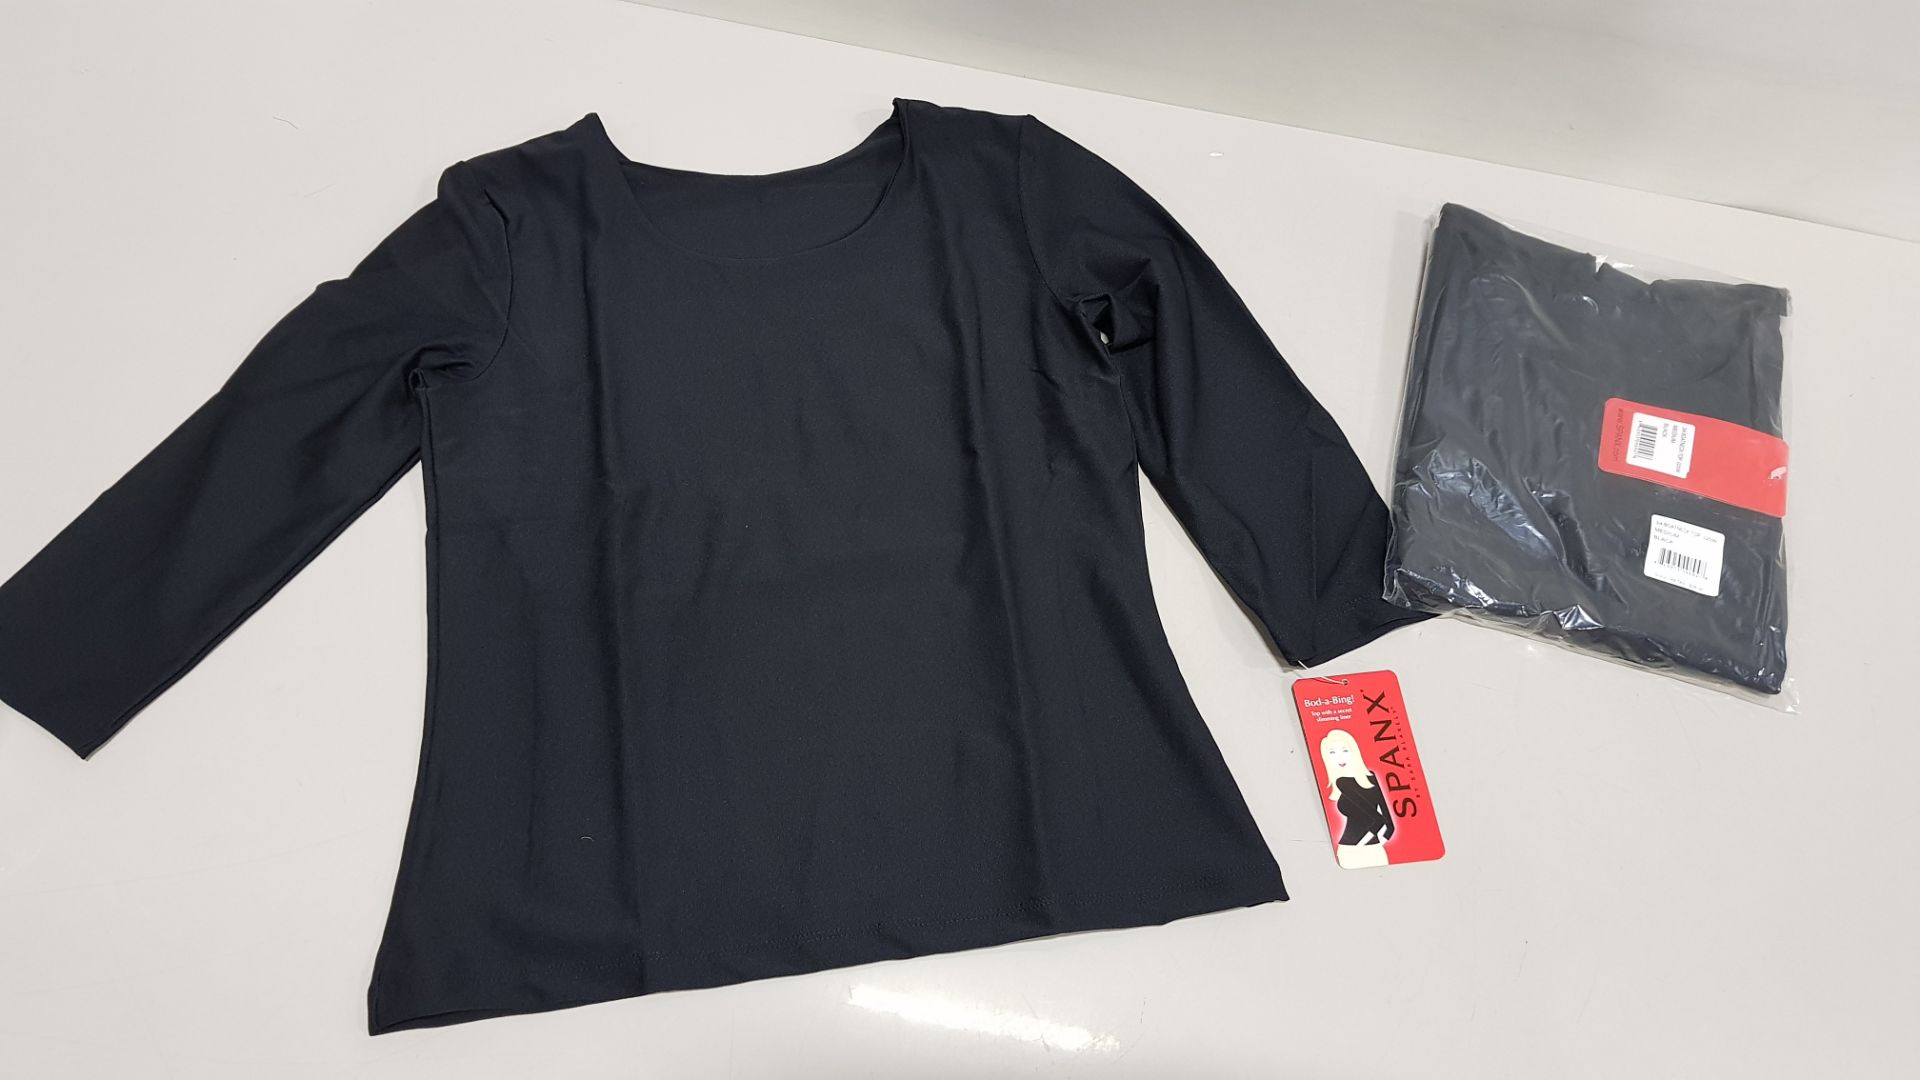 20 X BRAND NEW SPANX THREE QUARTER BOAT NECK TOP IN BLACK, SIZE SMALL RRP $58.00 (TOTAL RRP $1168.